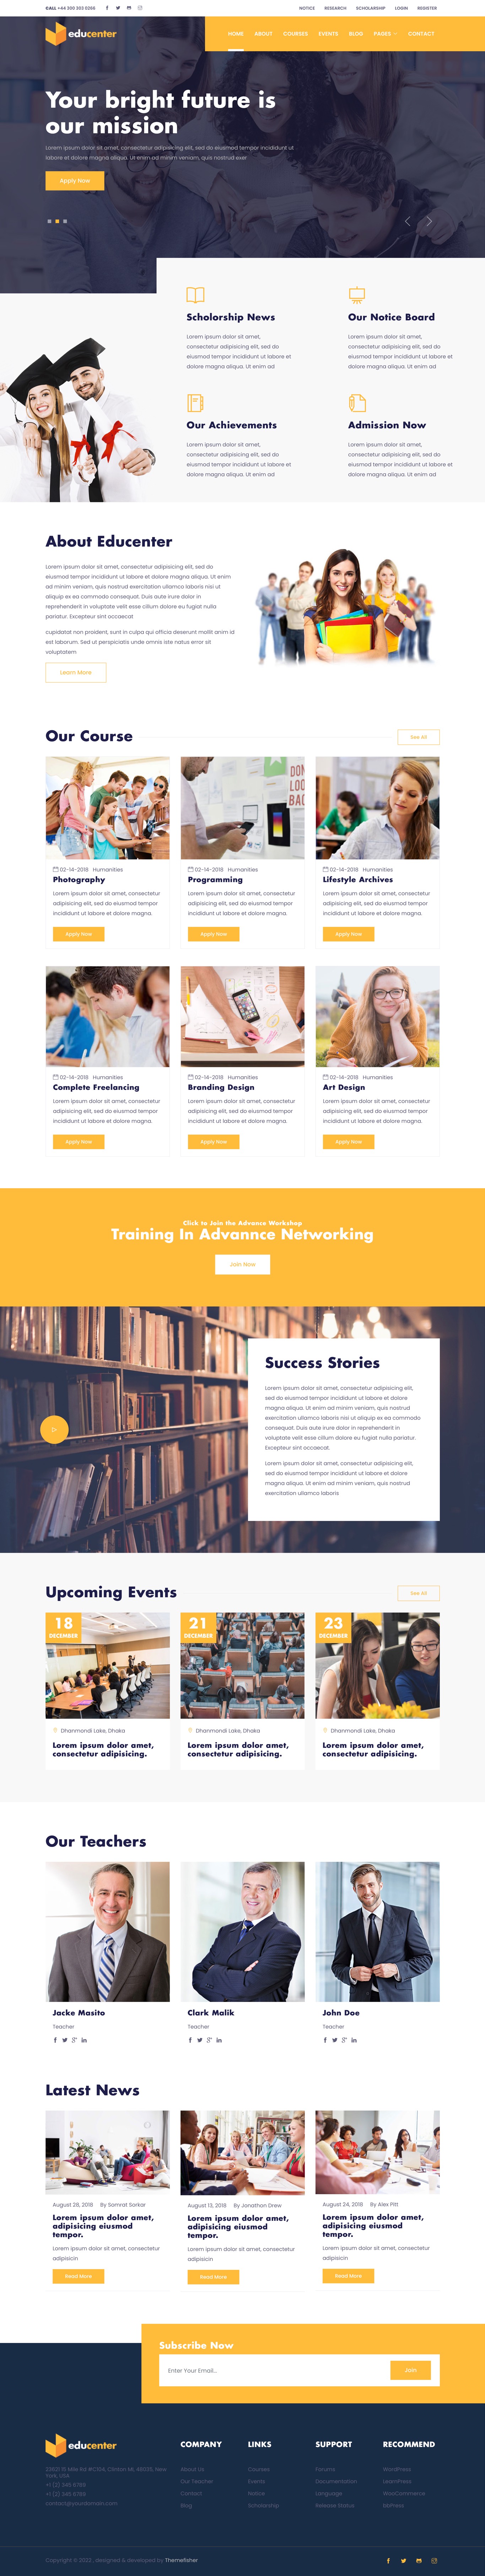 Educenter Free HTML template